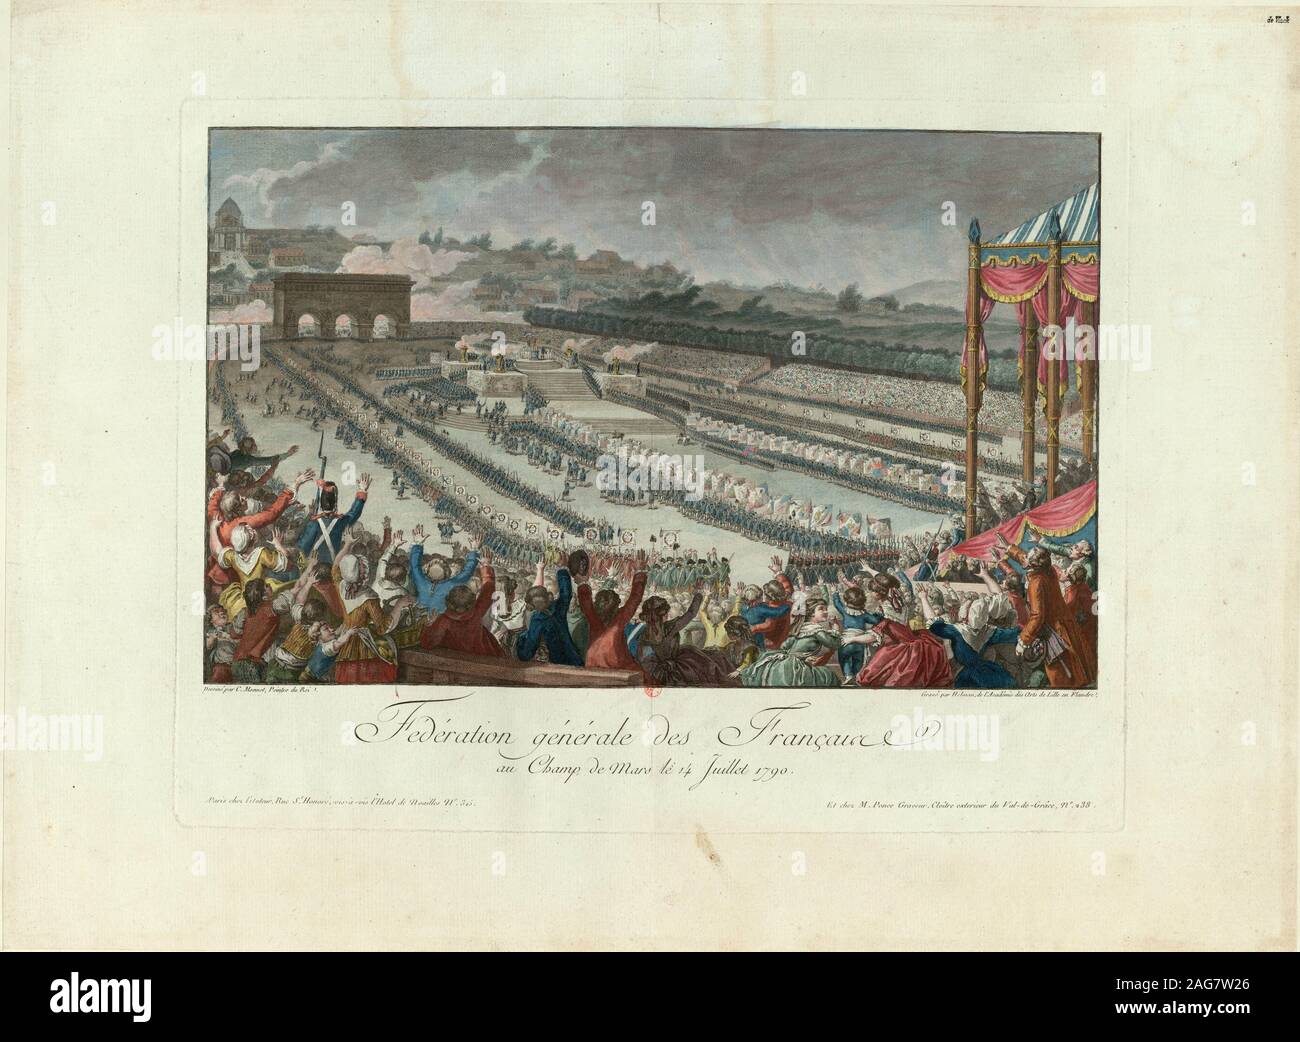 The Festival of the Federation at Champ de Mars on 14 July 1790, 1790. Found in the Collection of Biblioth&#xe8;que Nationale de France. Stock Photo